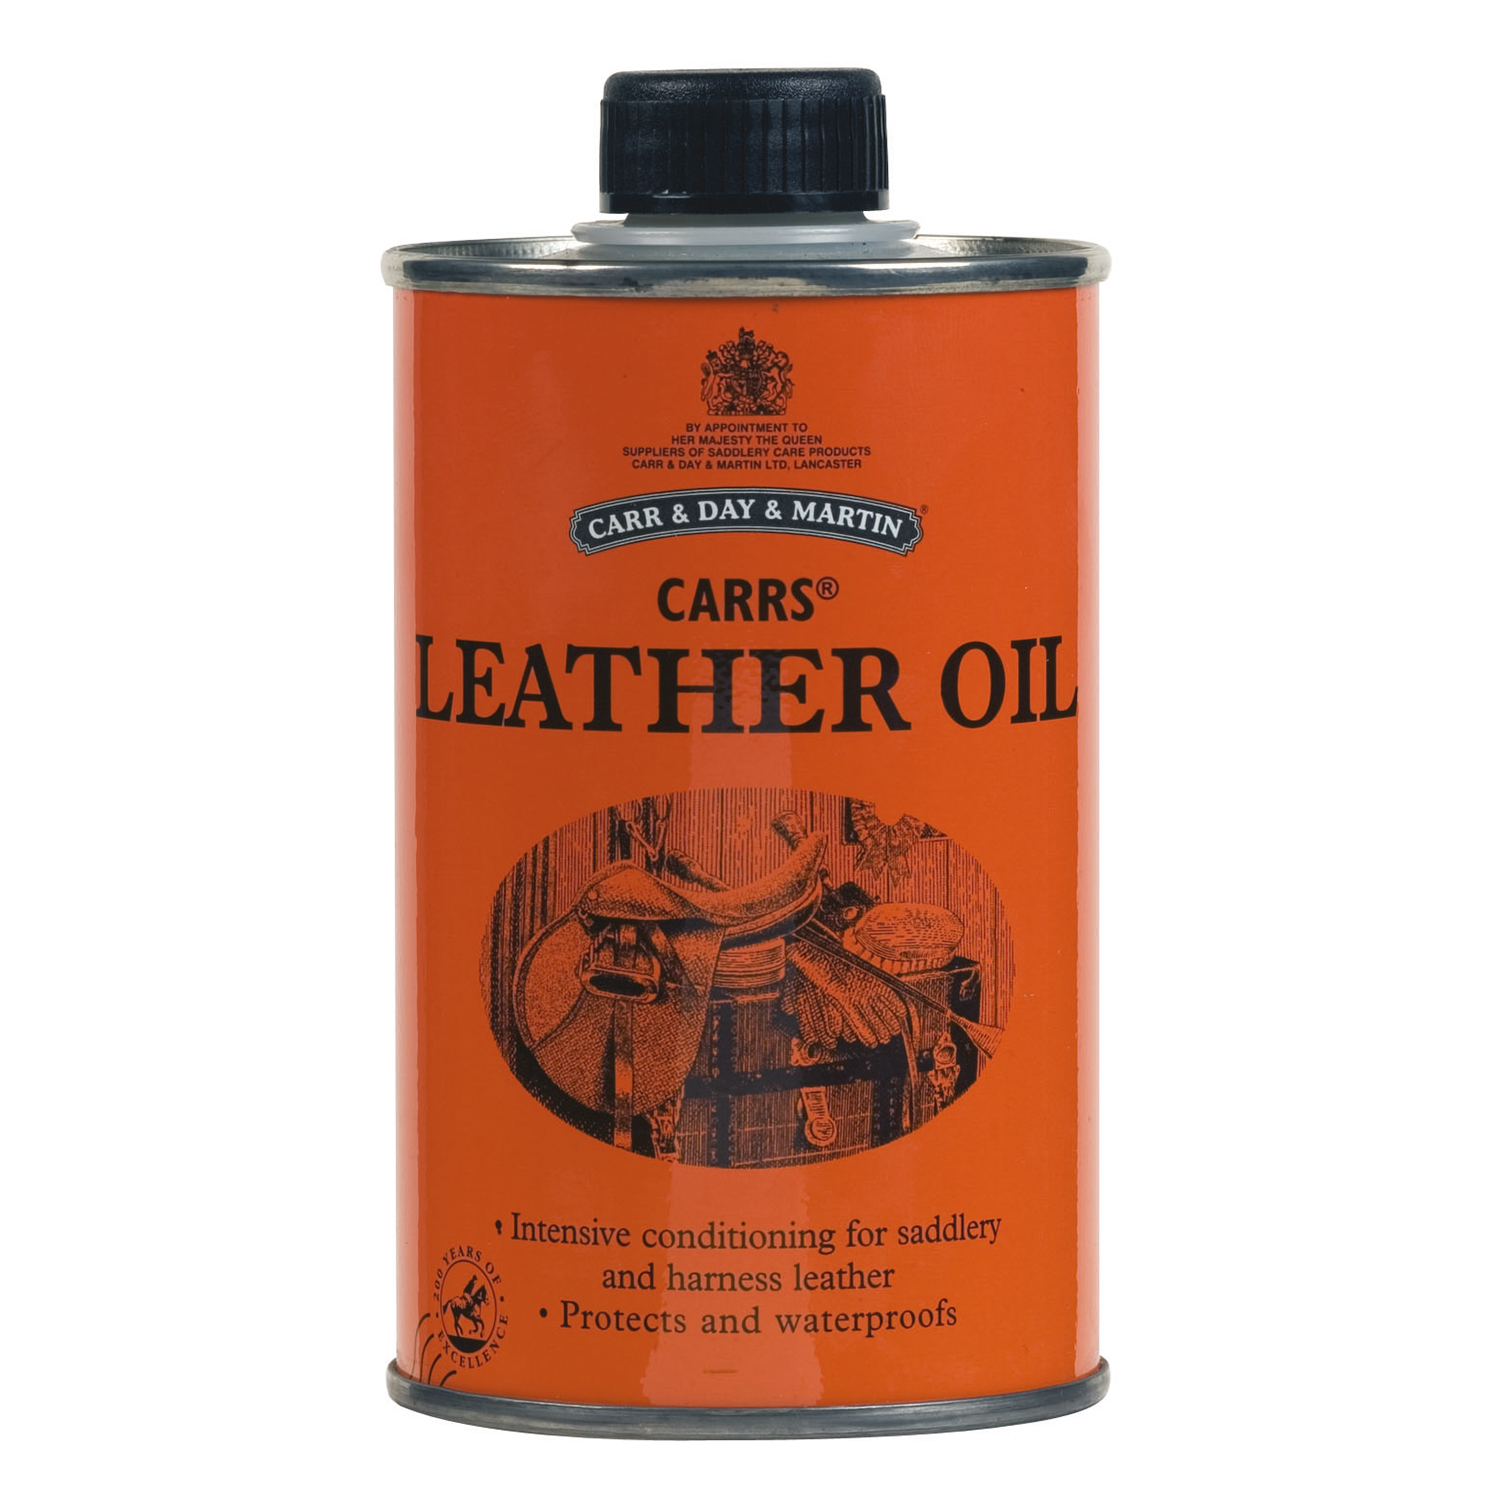 CARR & DAY & MARTIN CARRS LEATHER OIL 300 ML 300 ML